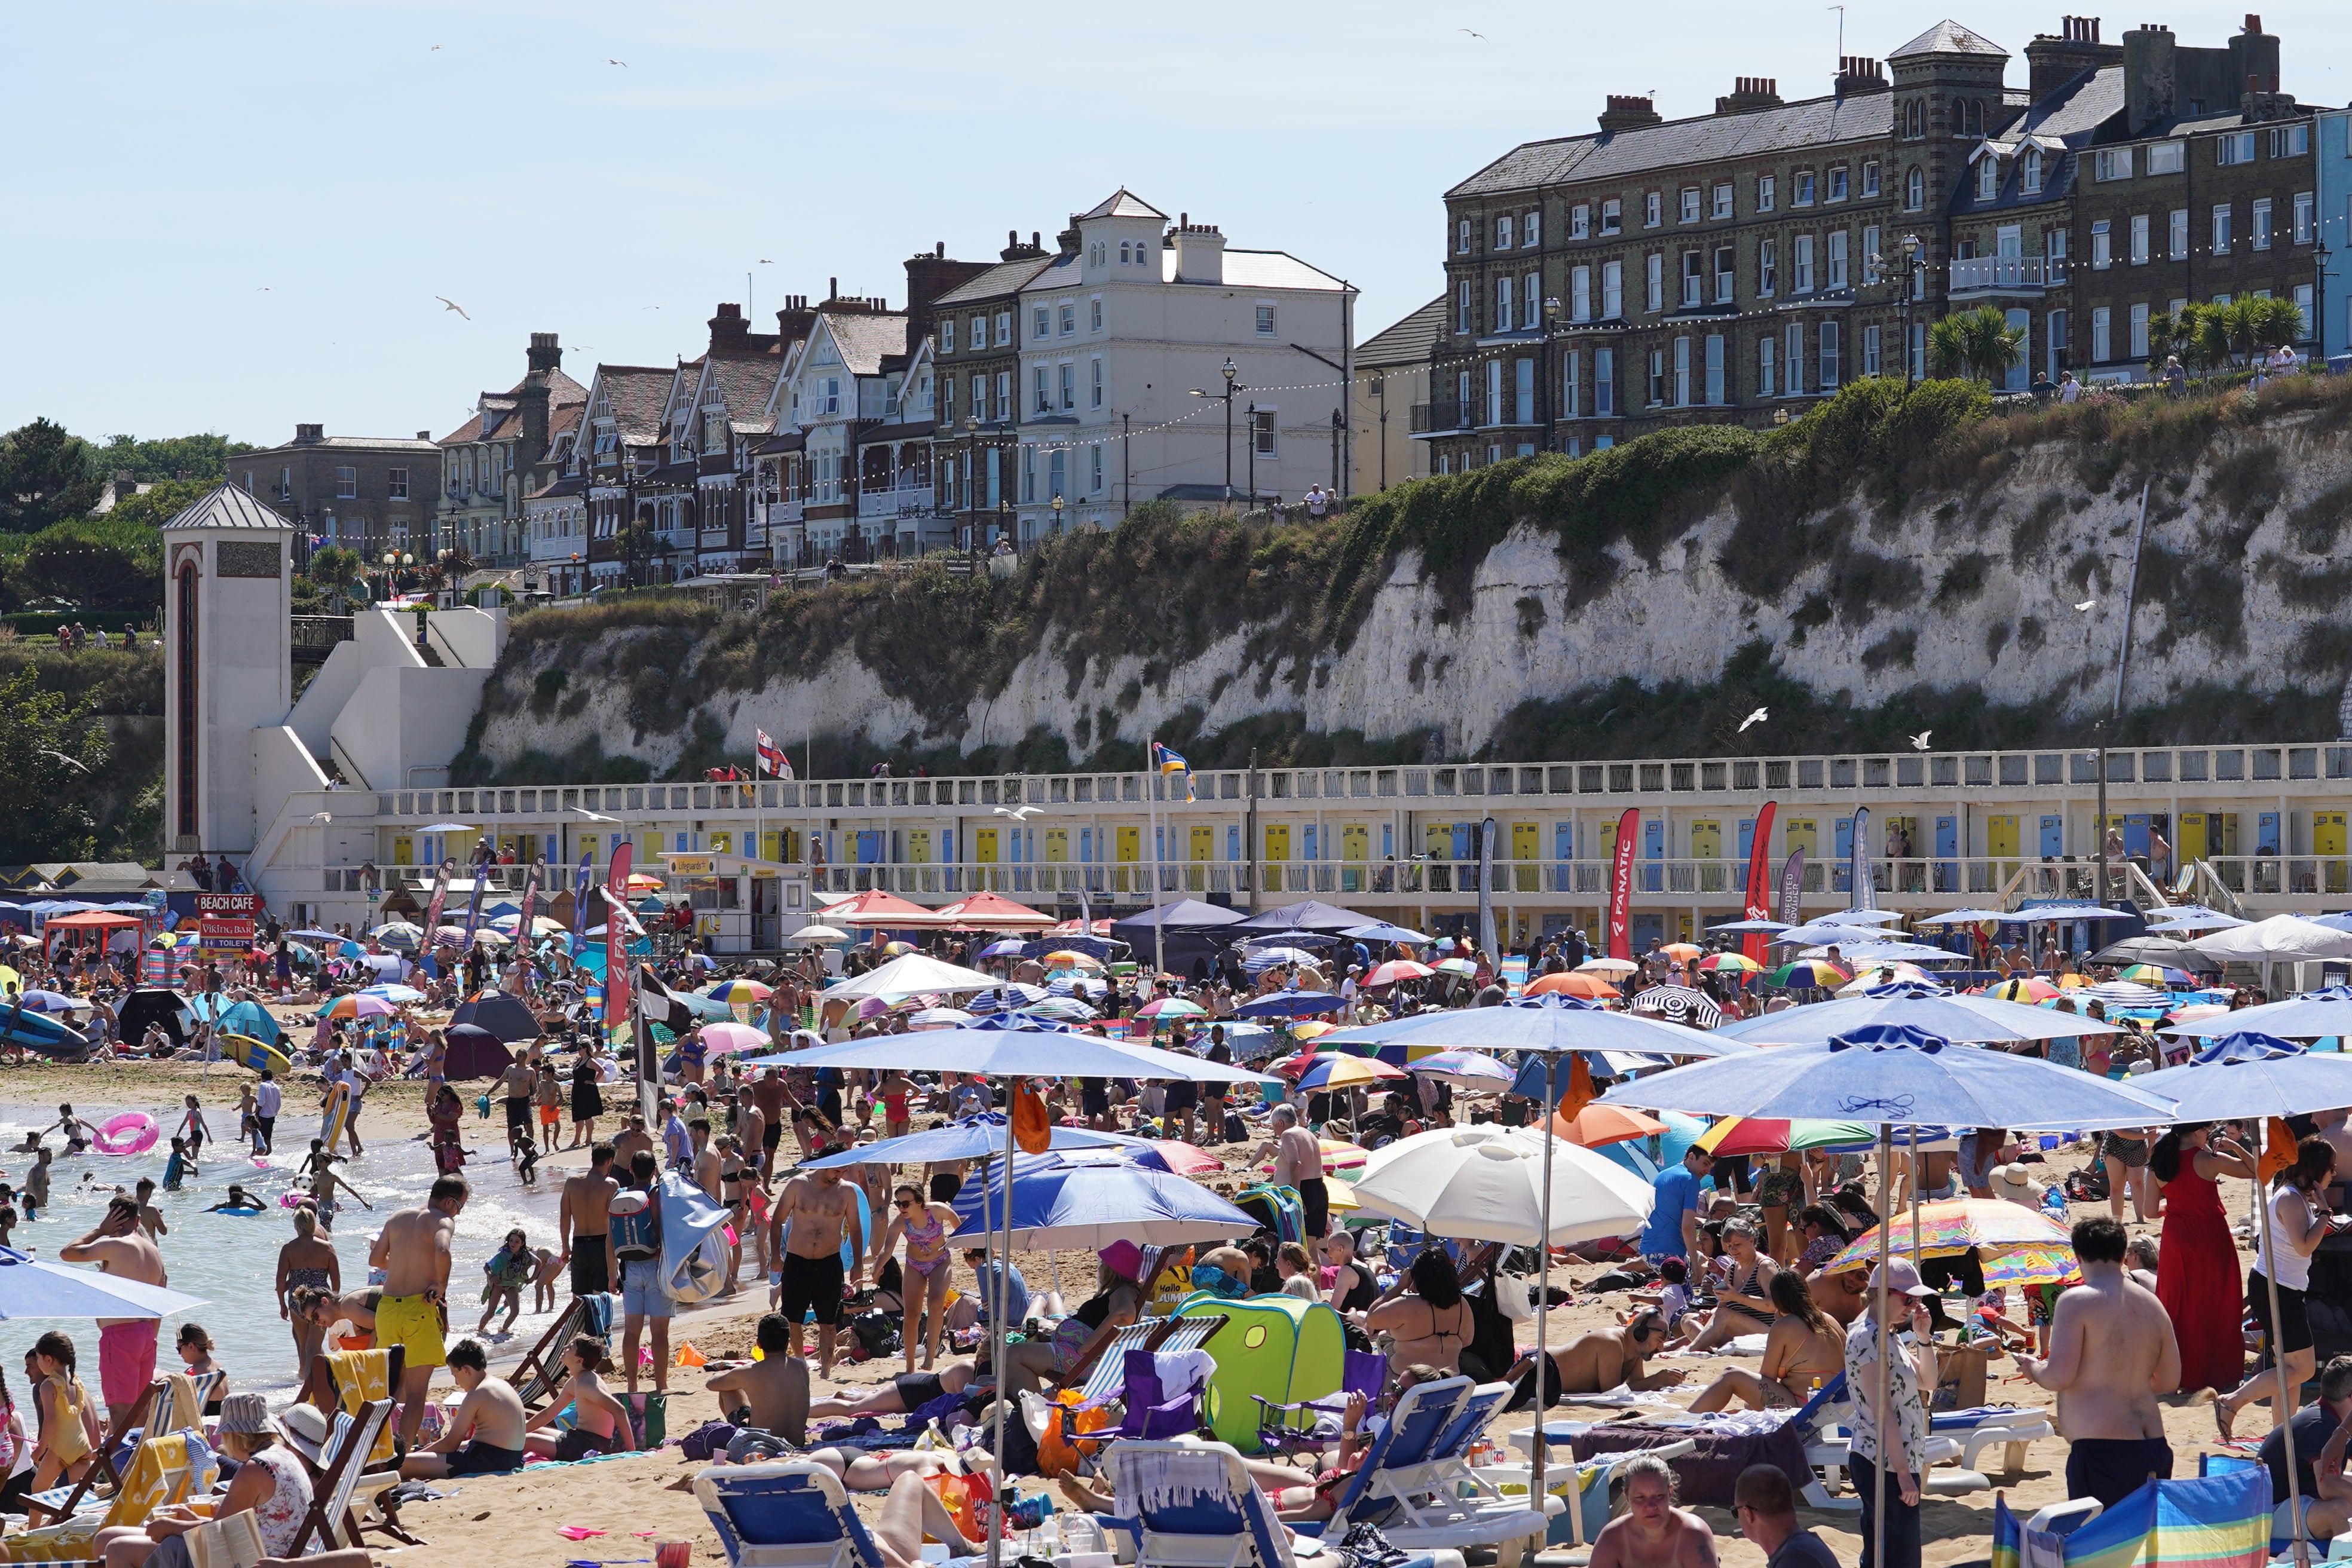 Hundreds of sunbathers at the beach in Broadstairs, Kent (Gareth Fuller/PA)